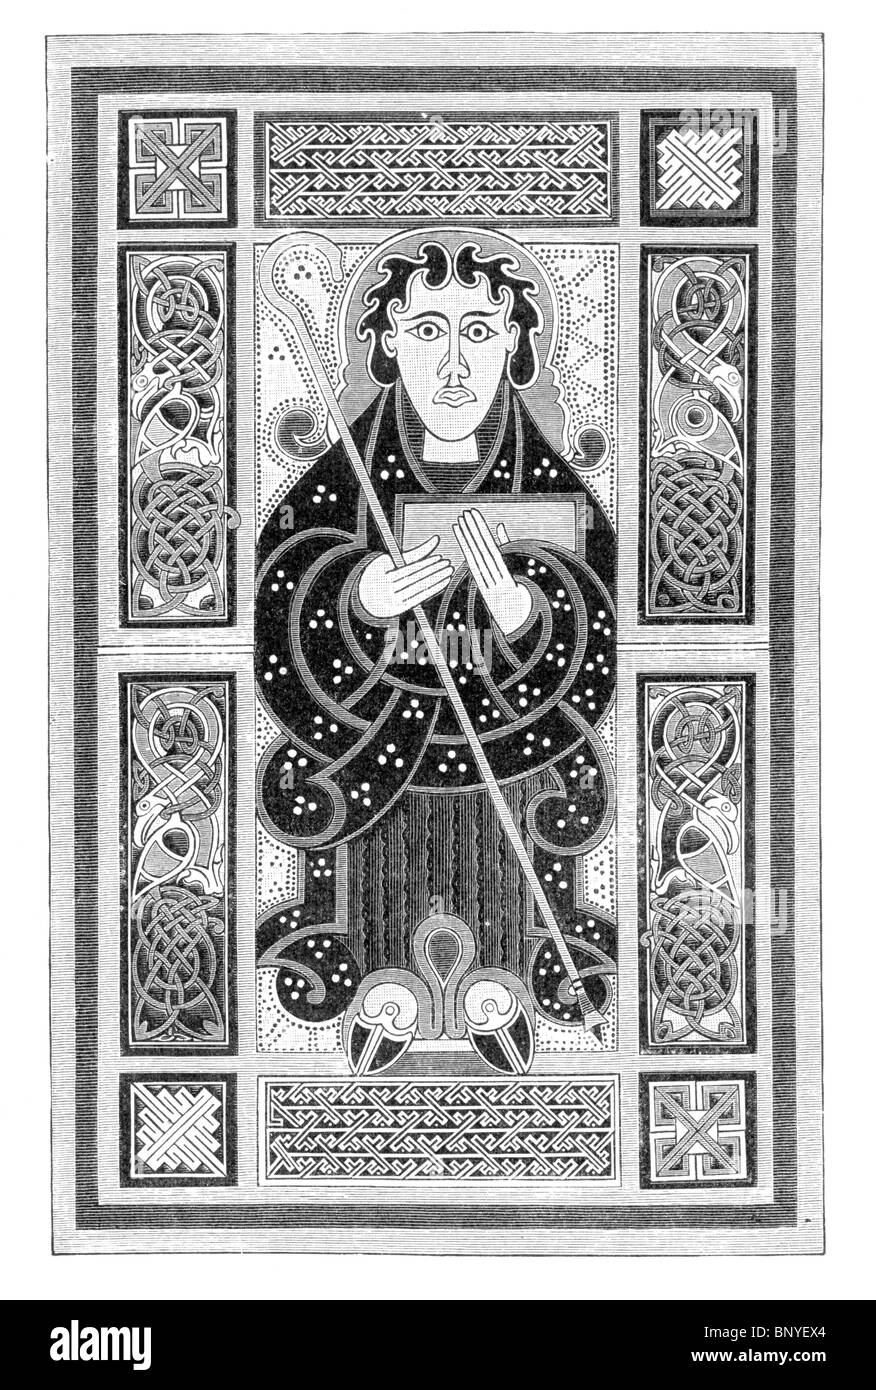 Black and White Illustration of Saint Matthew from the Gospel Book of Mac Durnan in the Lambeth Palace Library; ninth century Stock Photo